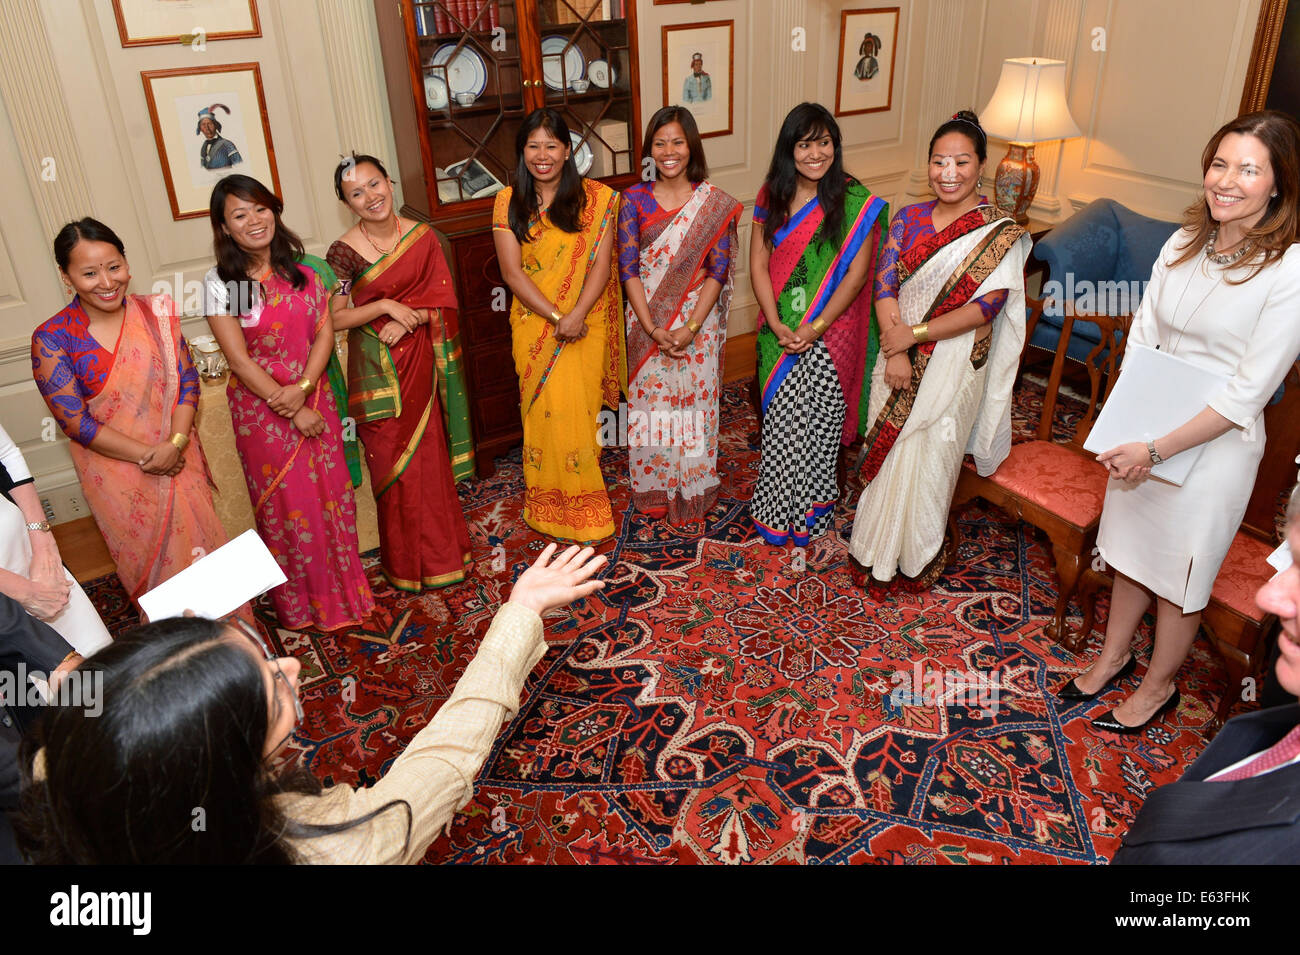 With Assistant Secretary of State for Educational and Cultural Affairs Evan Ryan looking on, right, Assistant Secretary of State for South and Central Asian Affairs Nisha Biswal speaks with seven women mountain climbers from Nepal at the U.S. Department o Stock Photo